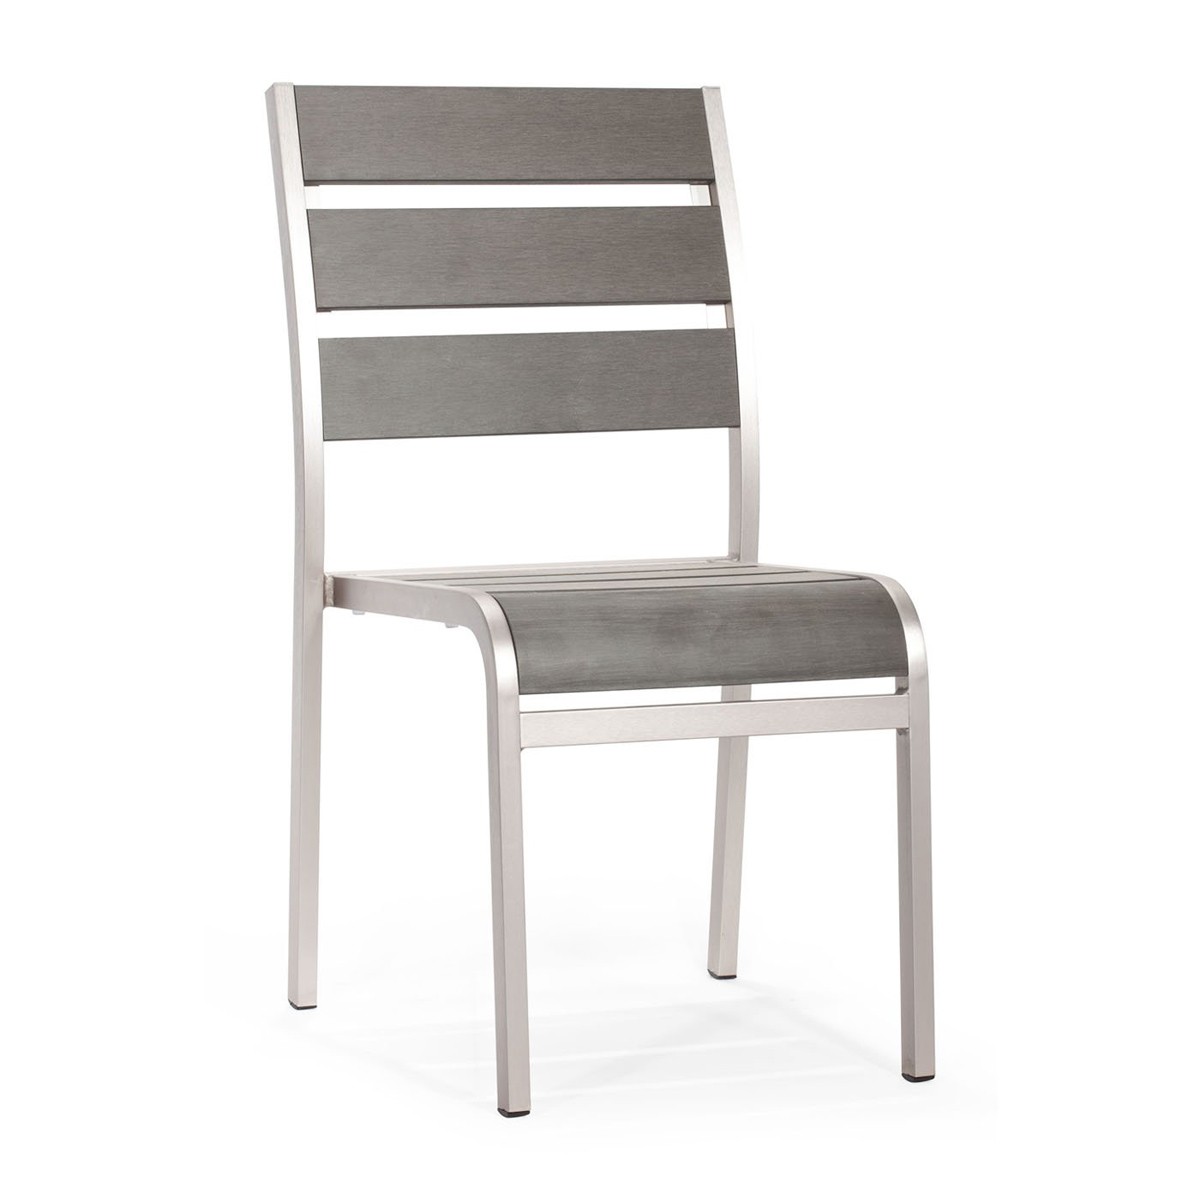 Zuo Modern Township Dining Armless Chair - Brushed Aluminum